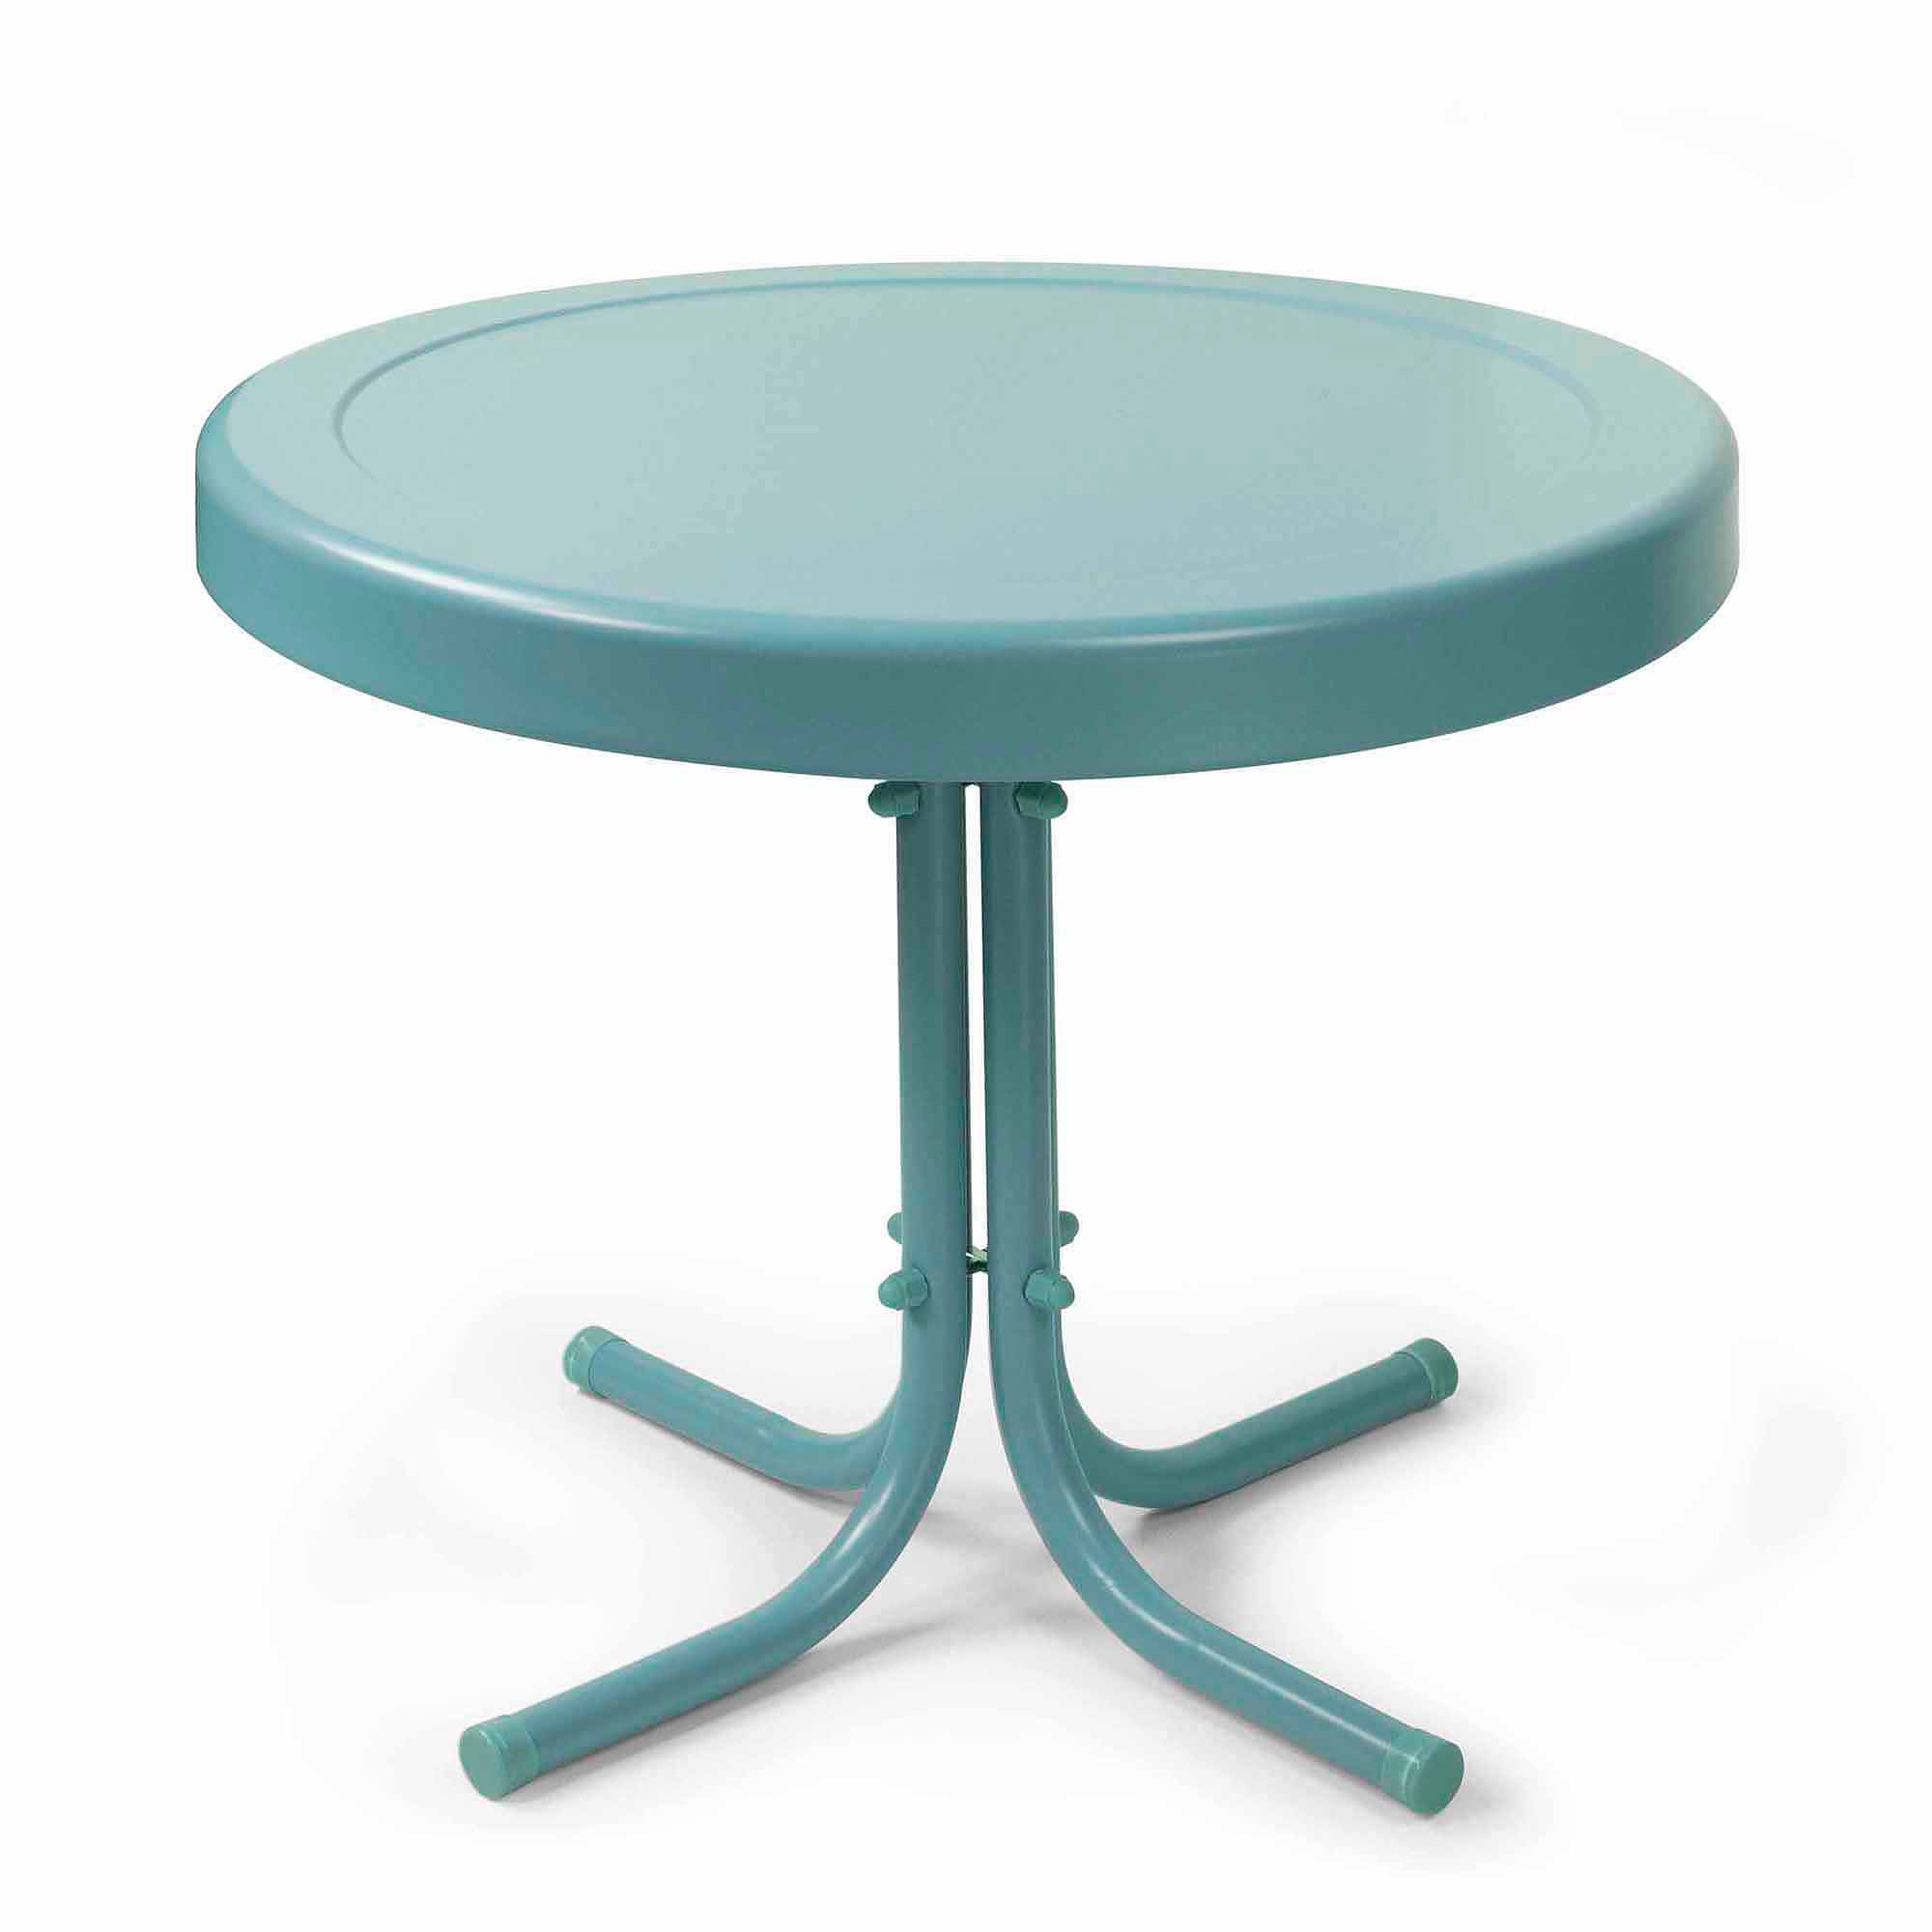 stackable coffee table the outrageous beautiful teal round end crosley furniture retro metal side inch vintage trunk box threshold mirrored accent ikea frame shelf steel base with